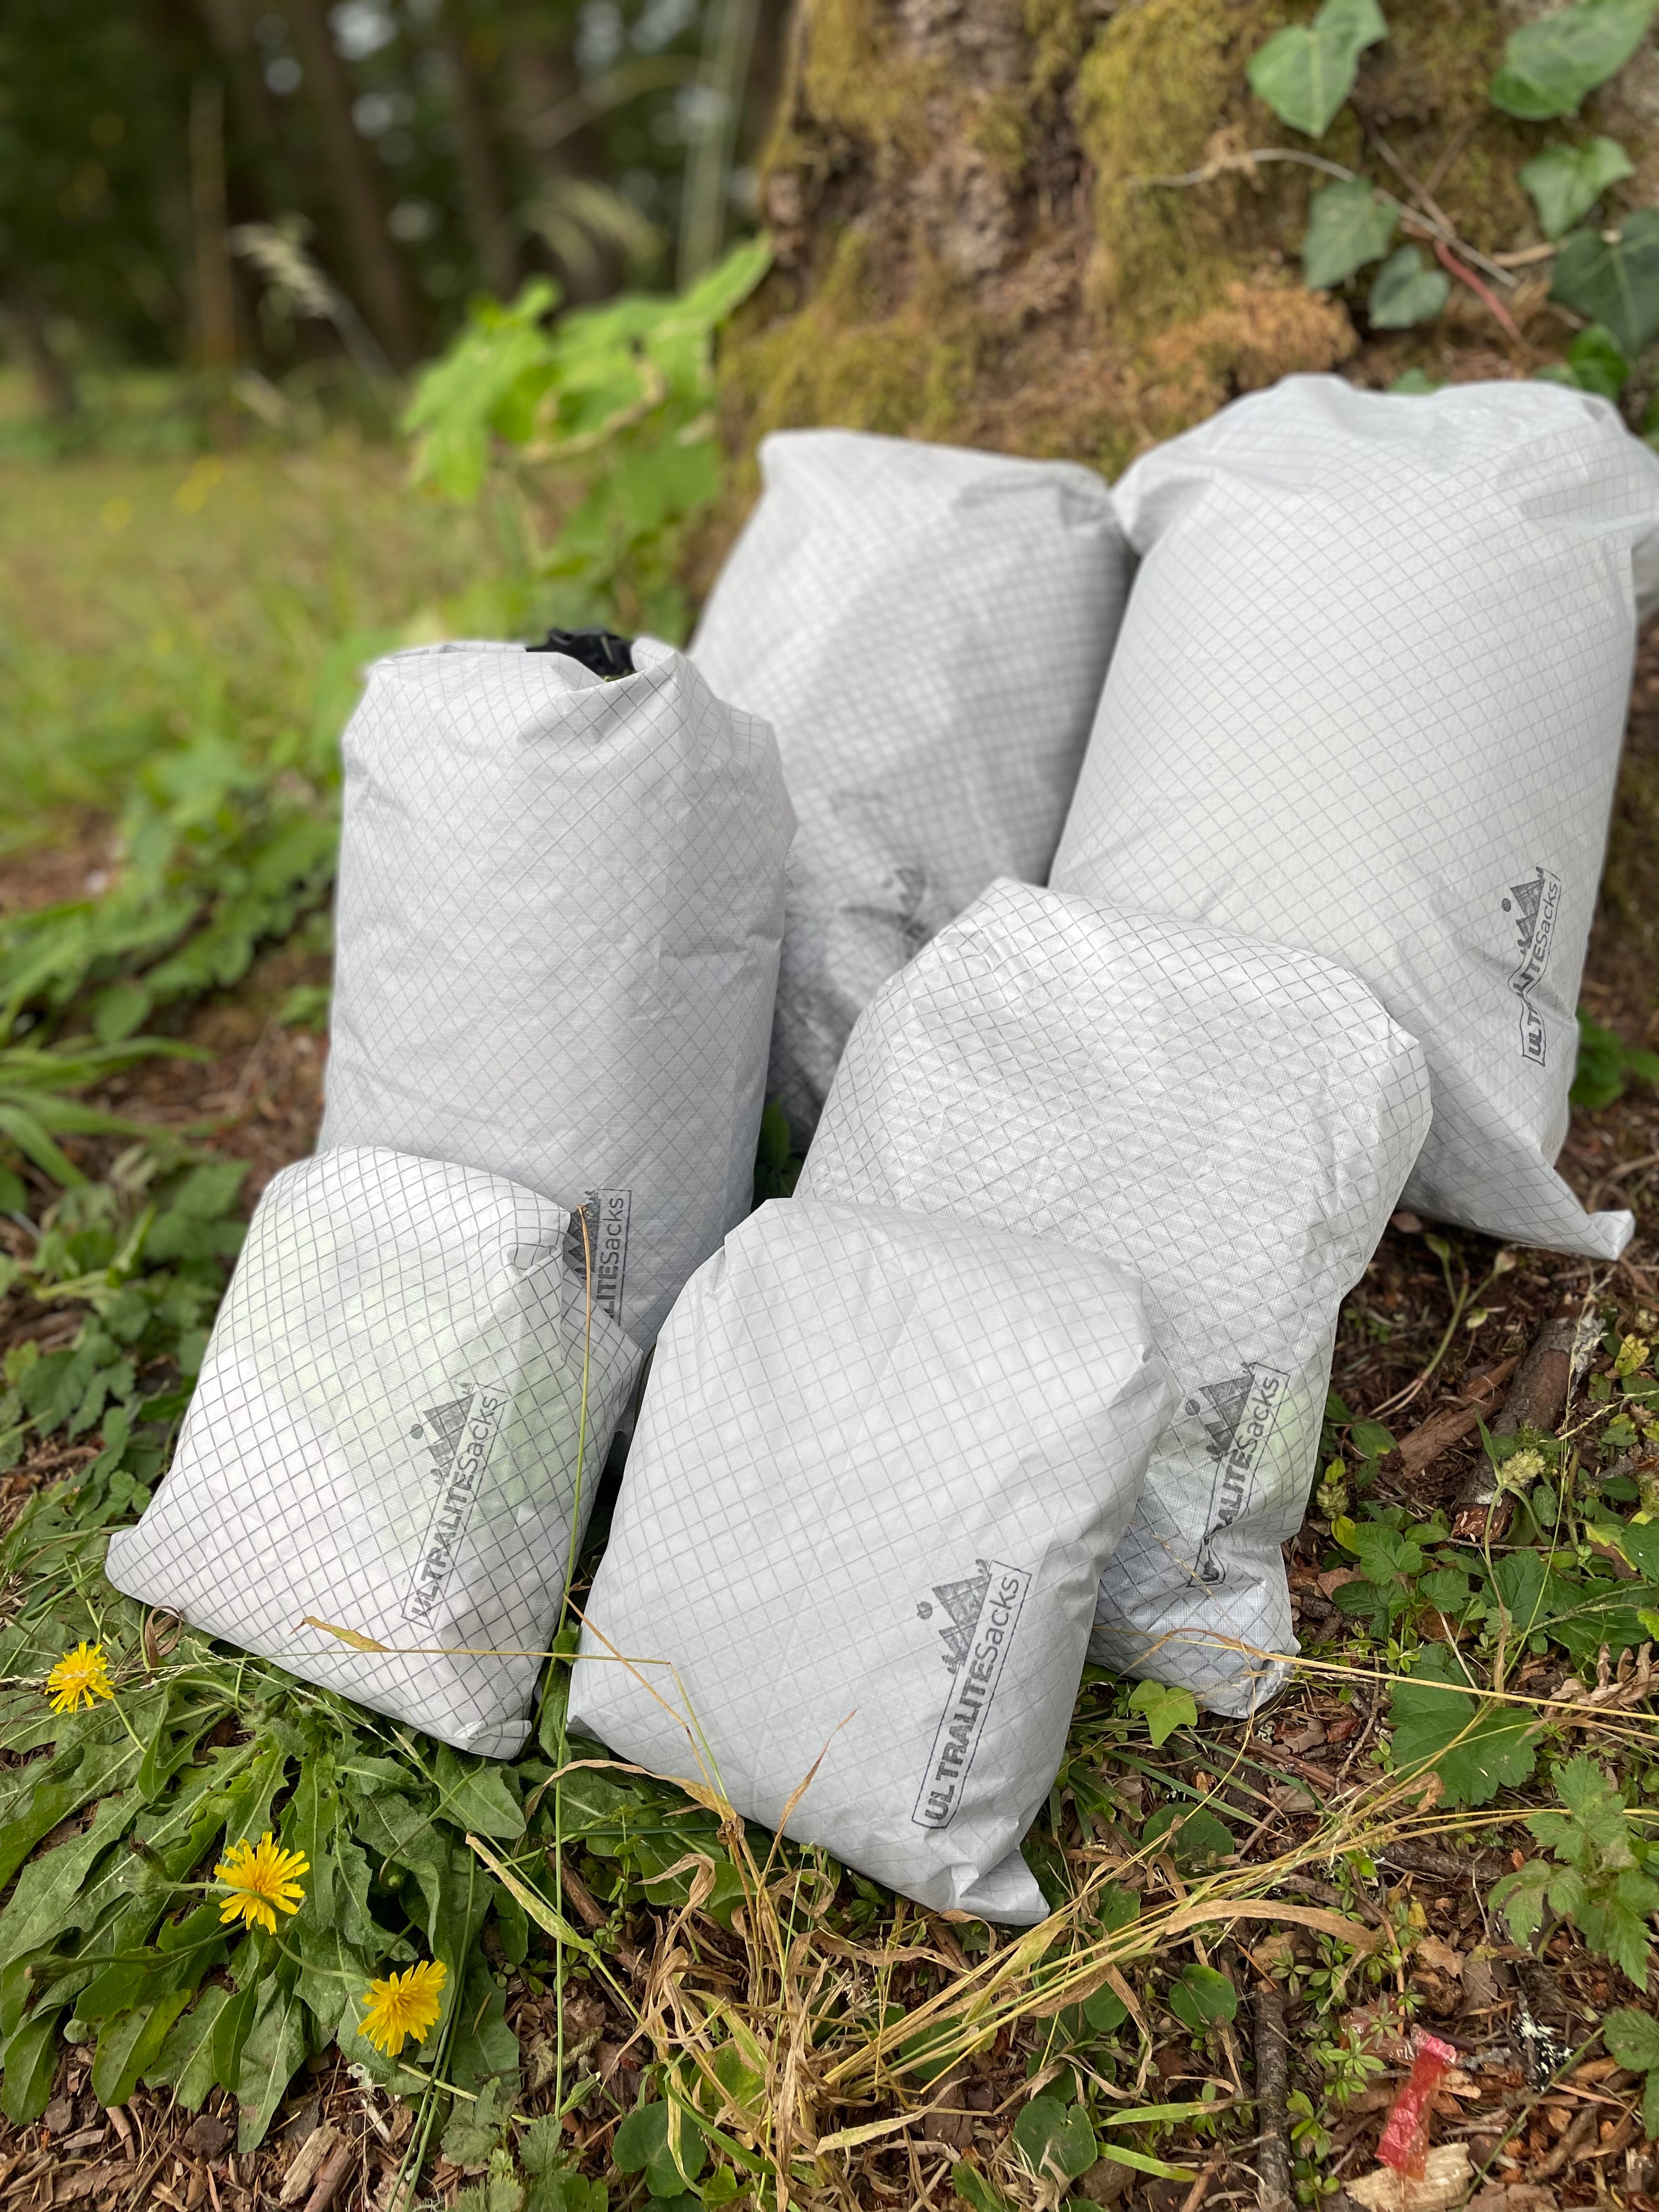 Roll-Top Dry Bags